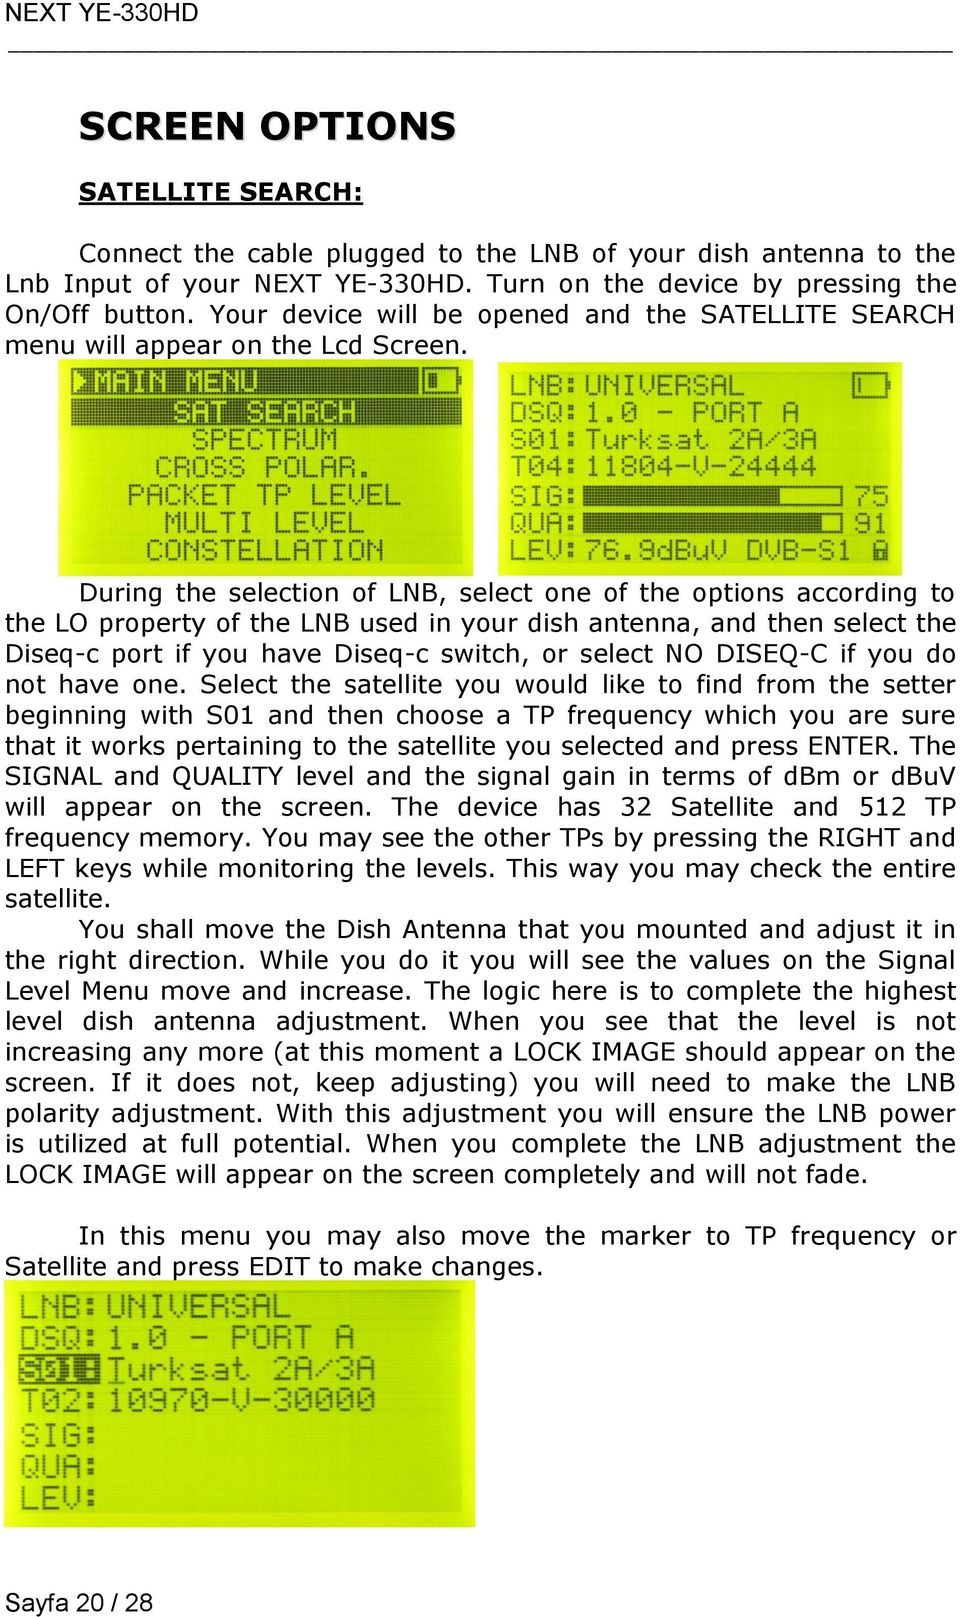 During the selection of LNB, select one of the options according to the LO property of the LNB used in your dish antenna, and then select the Diseq-c port if you have Diseq-c switch, or select NO